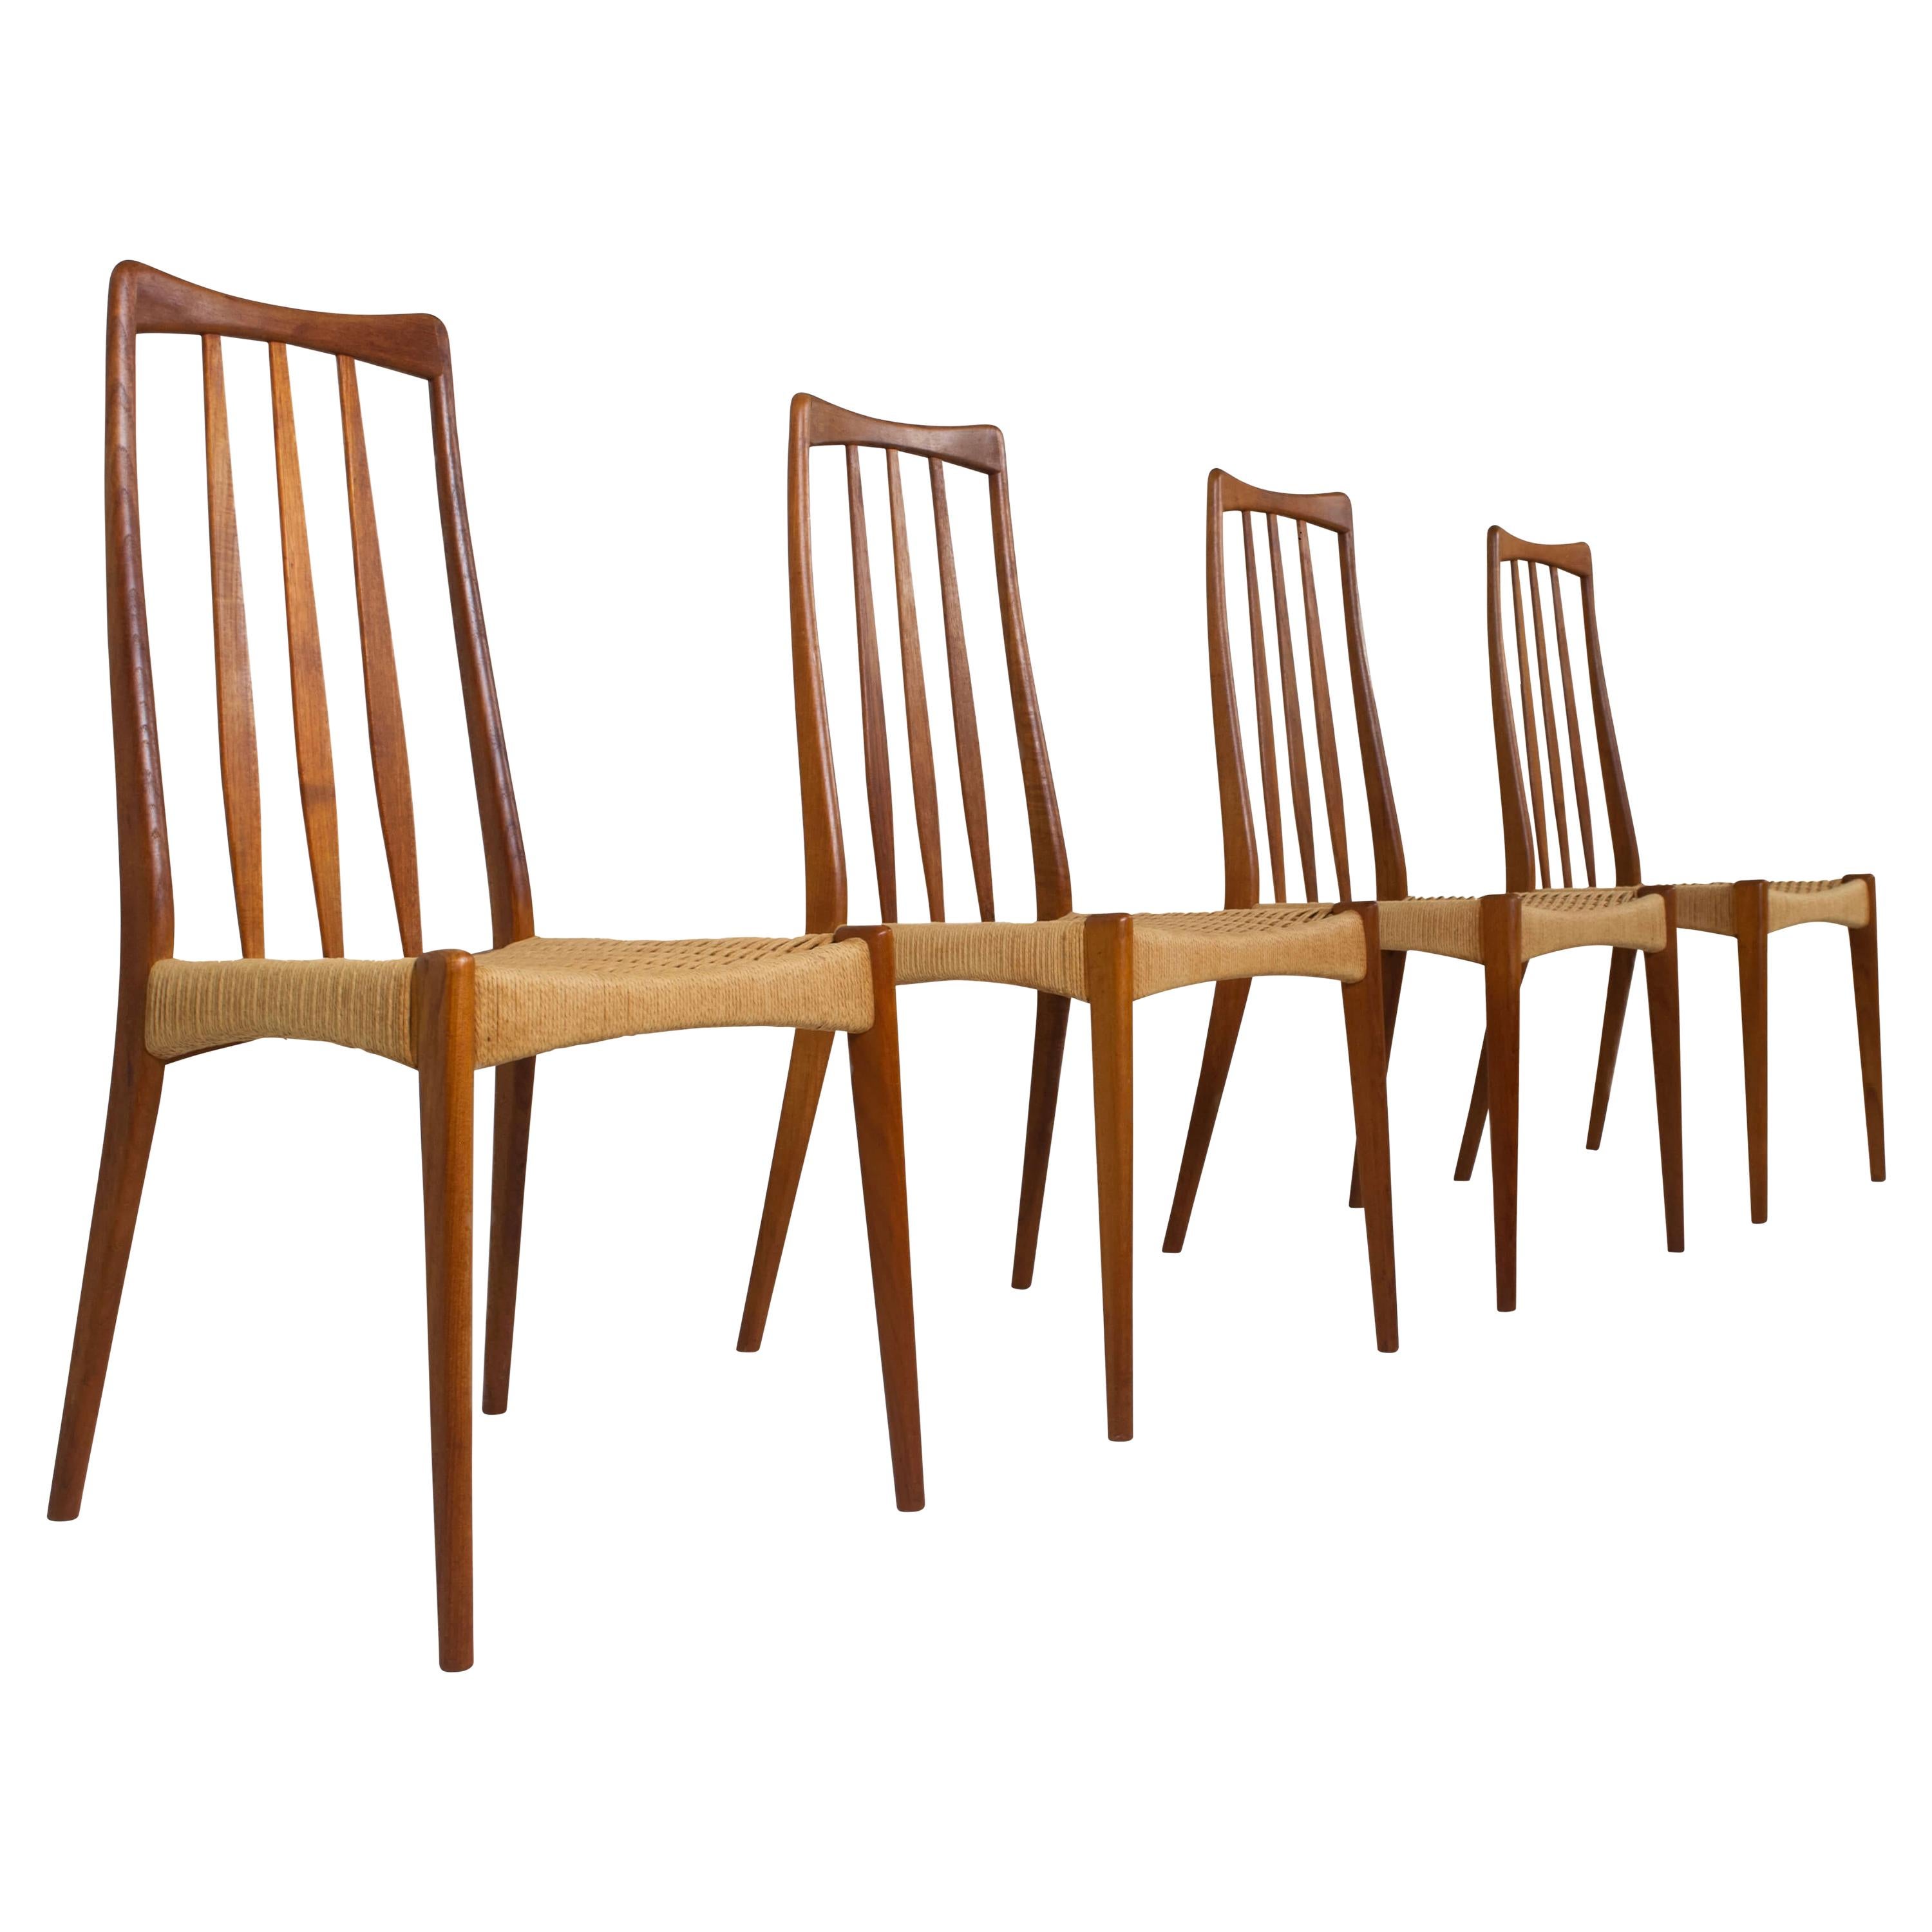 Set of 4 Scandinavian Design Vintage Dining Chairs in Papercord and Teak